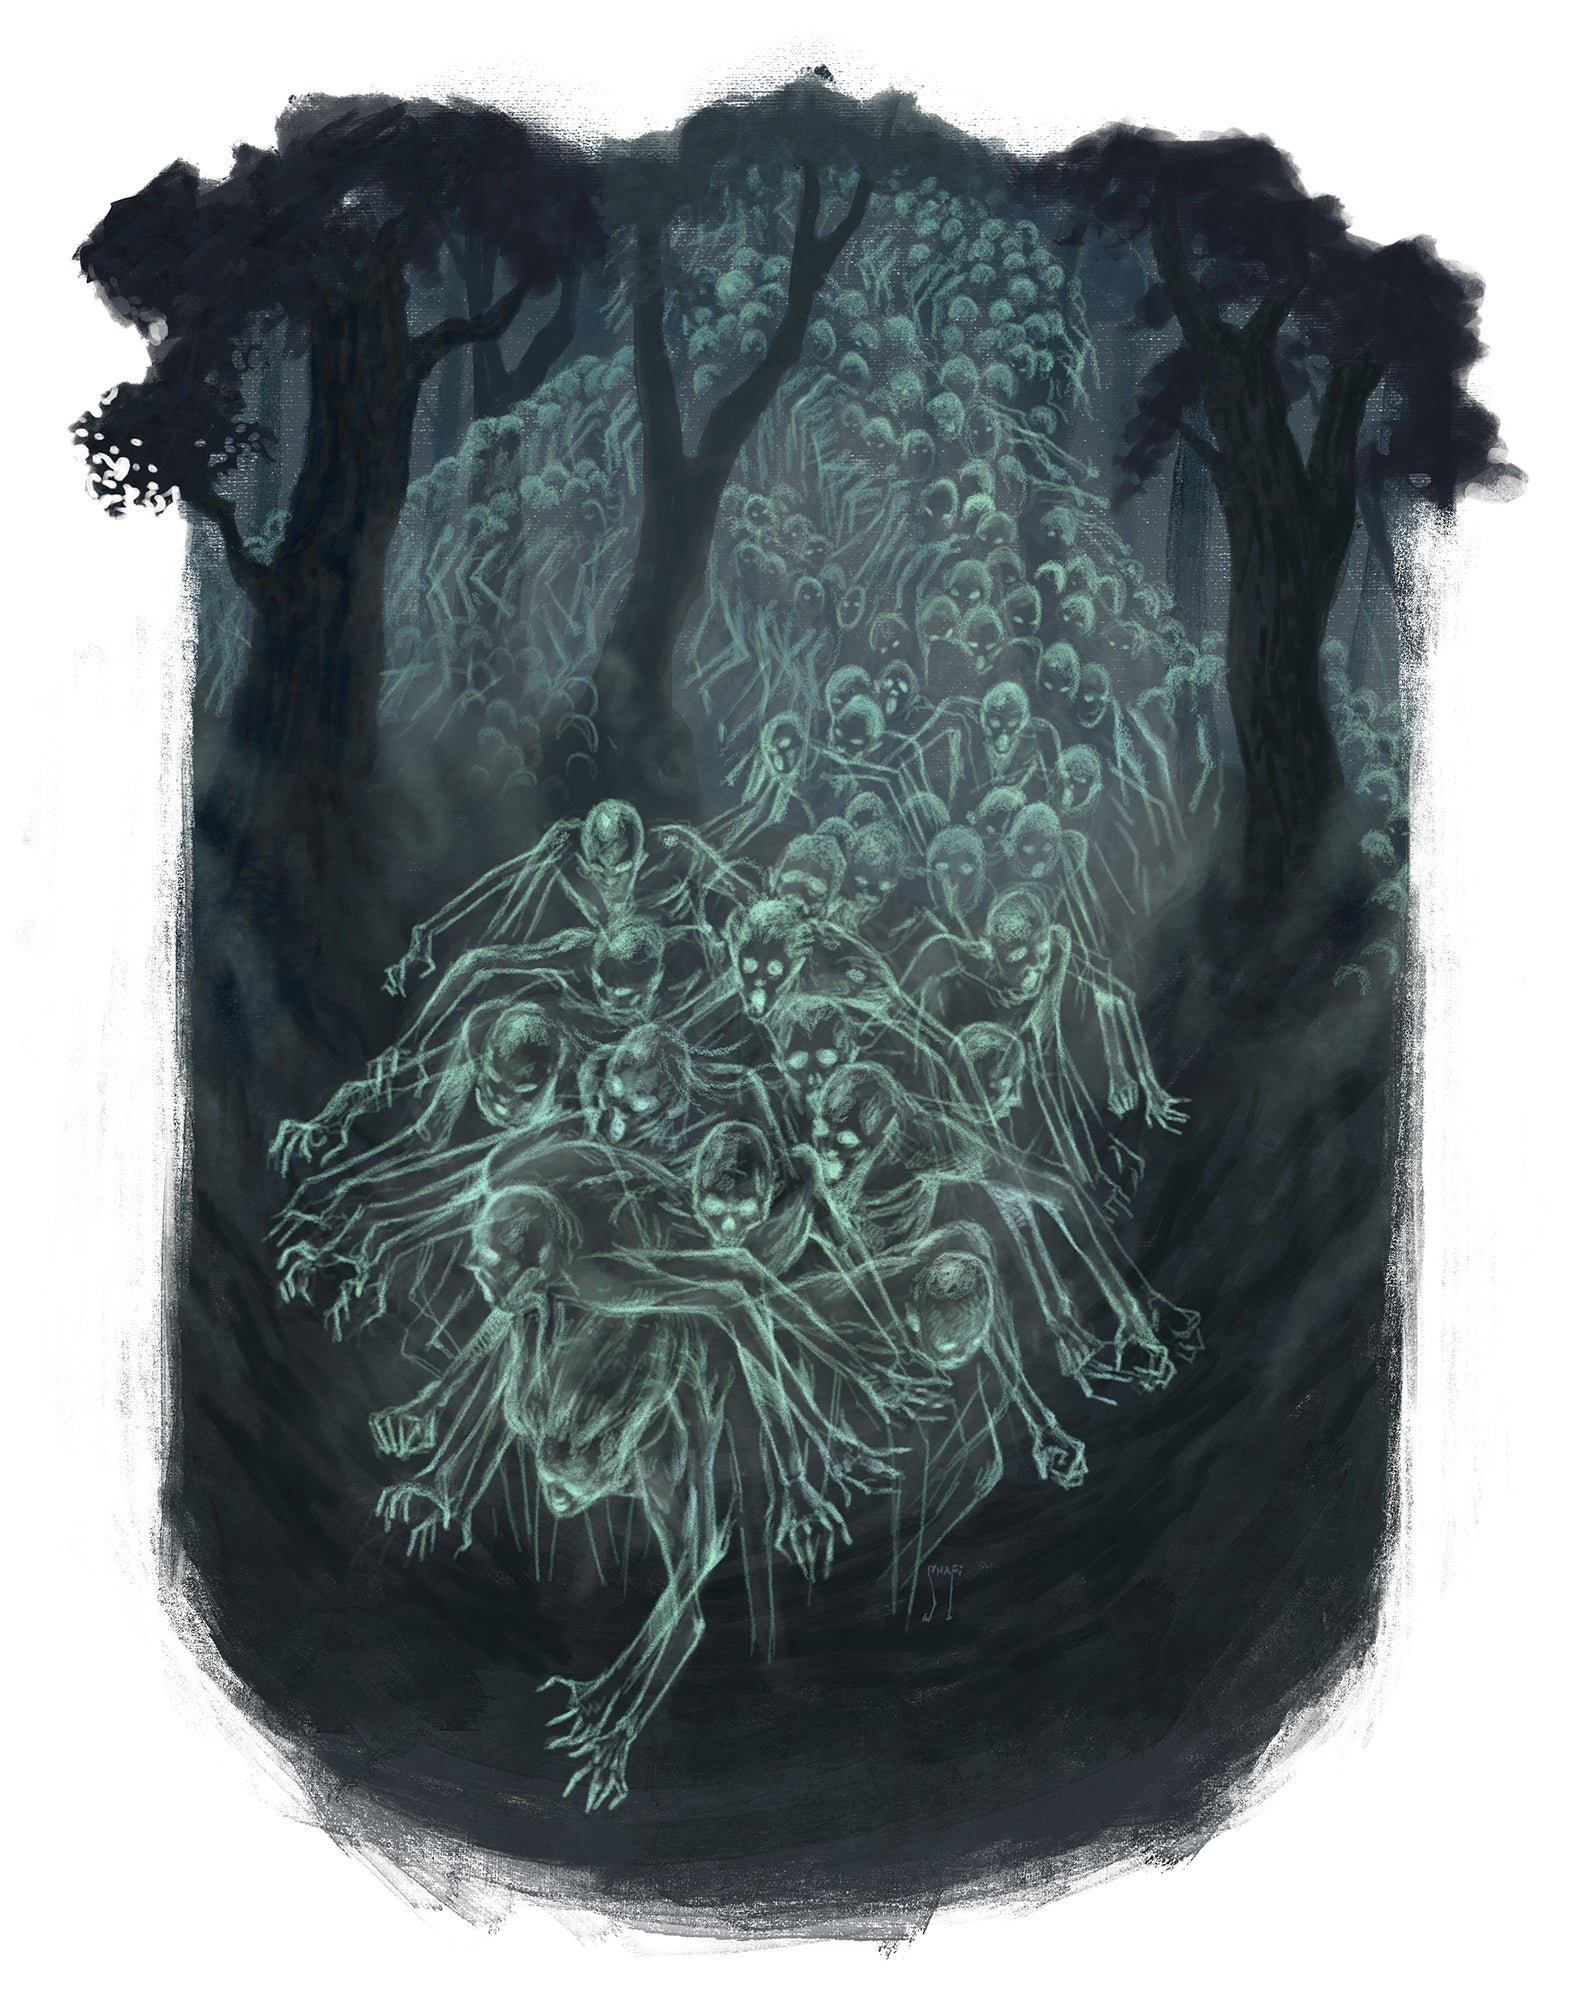 A large crowd of translucent ghosts making their way out of the woods